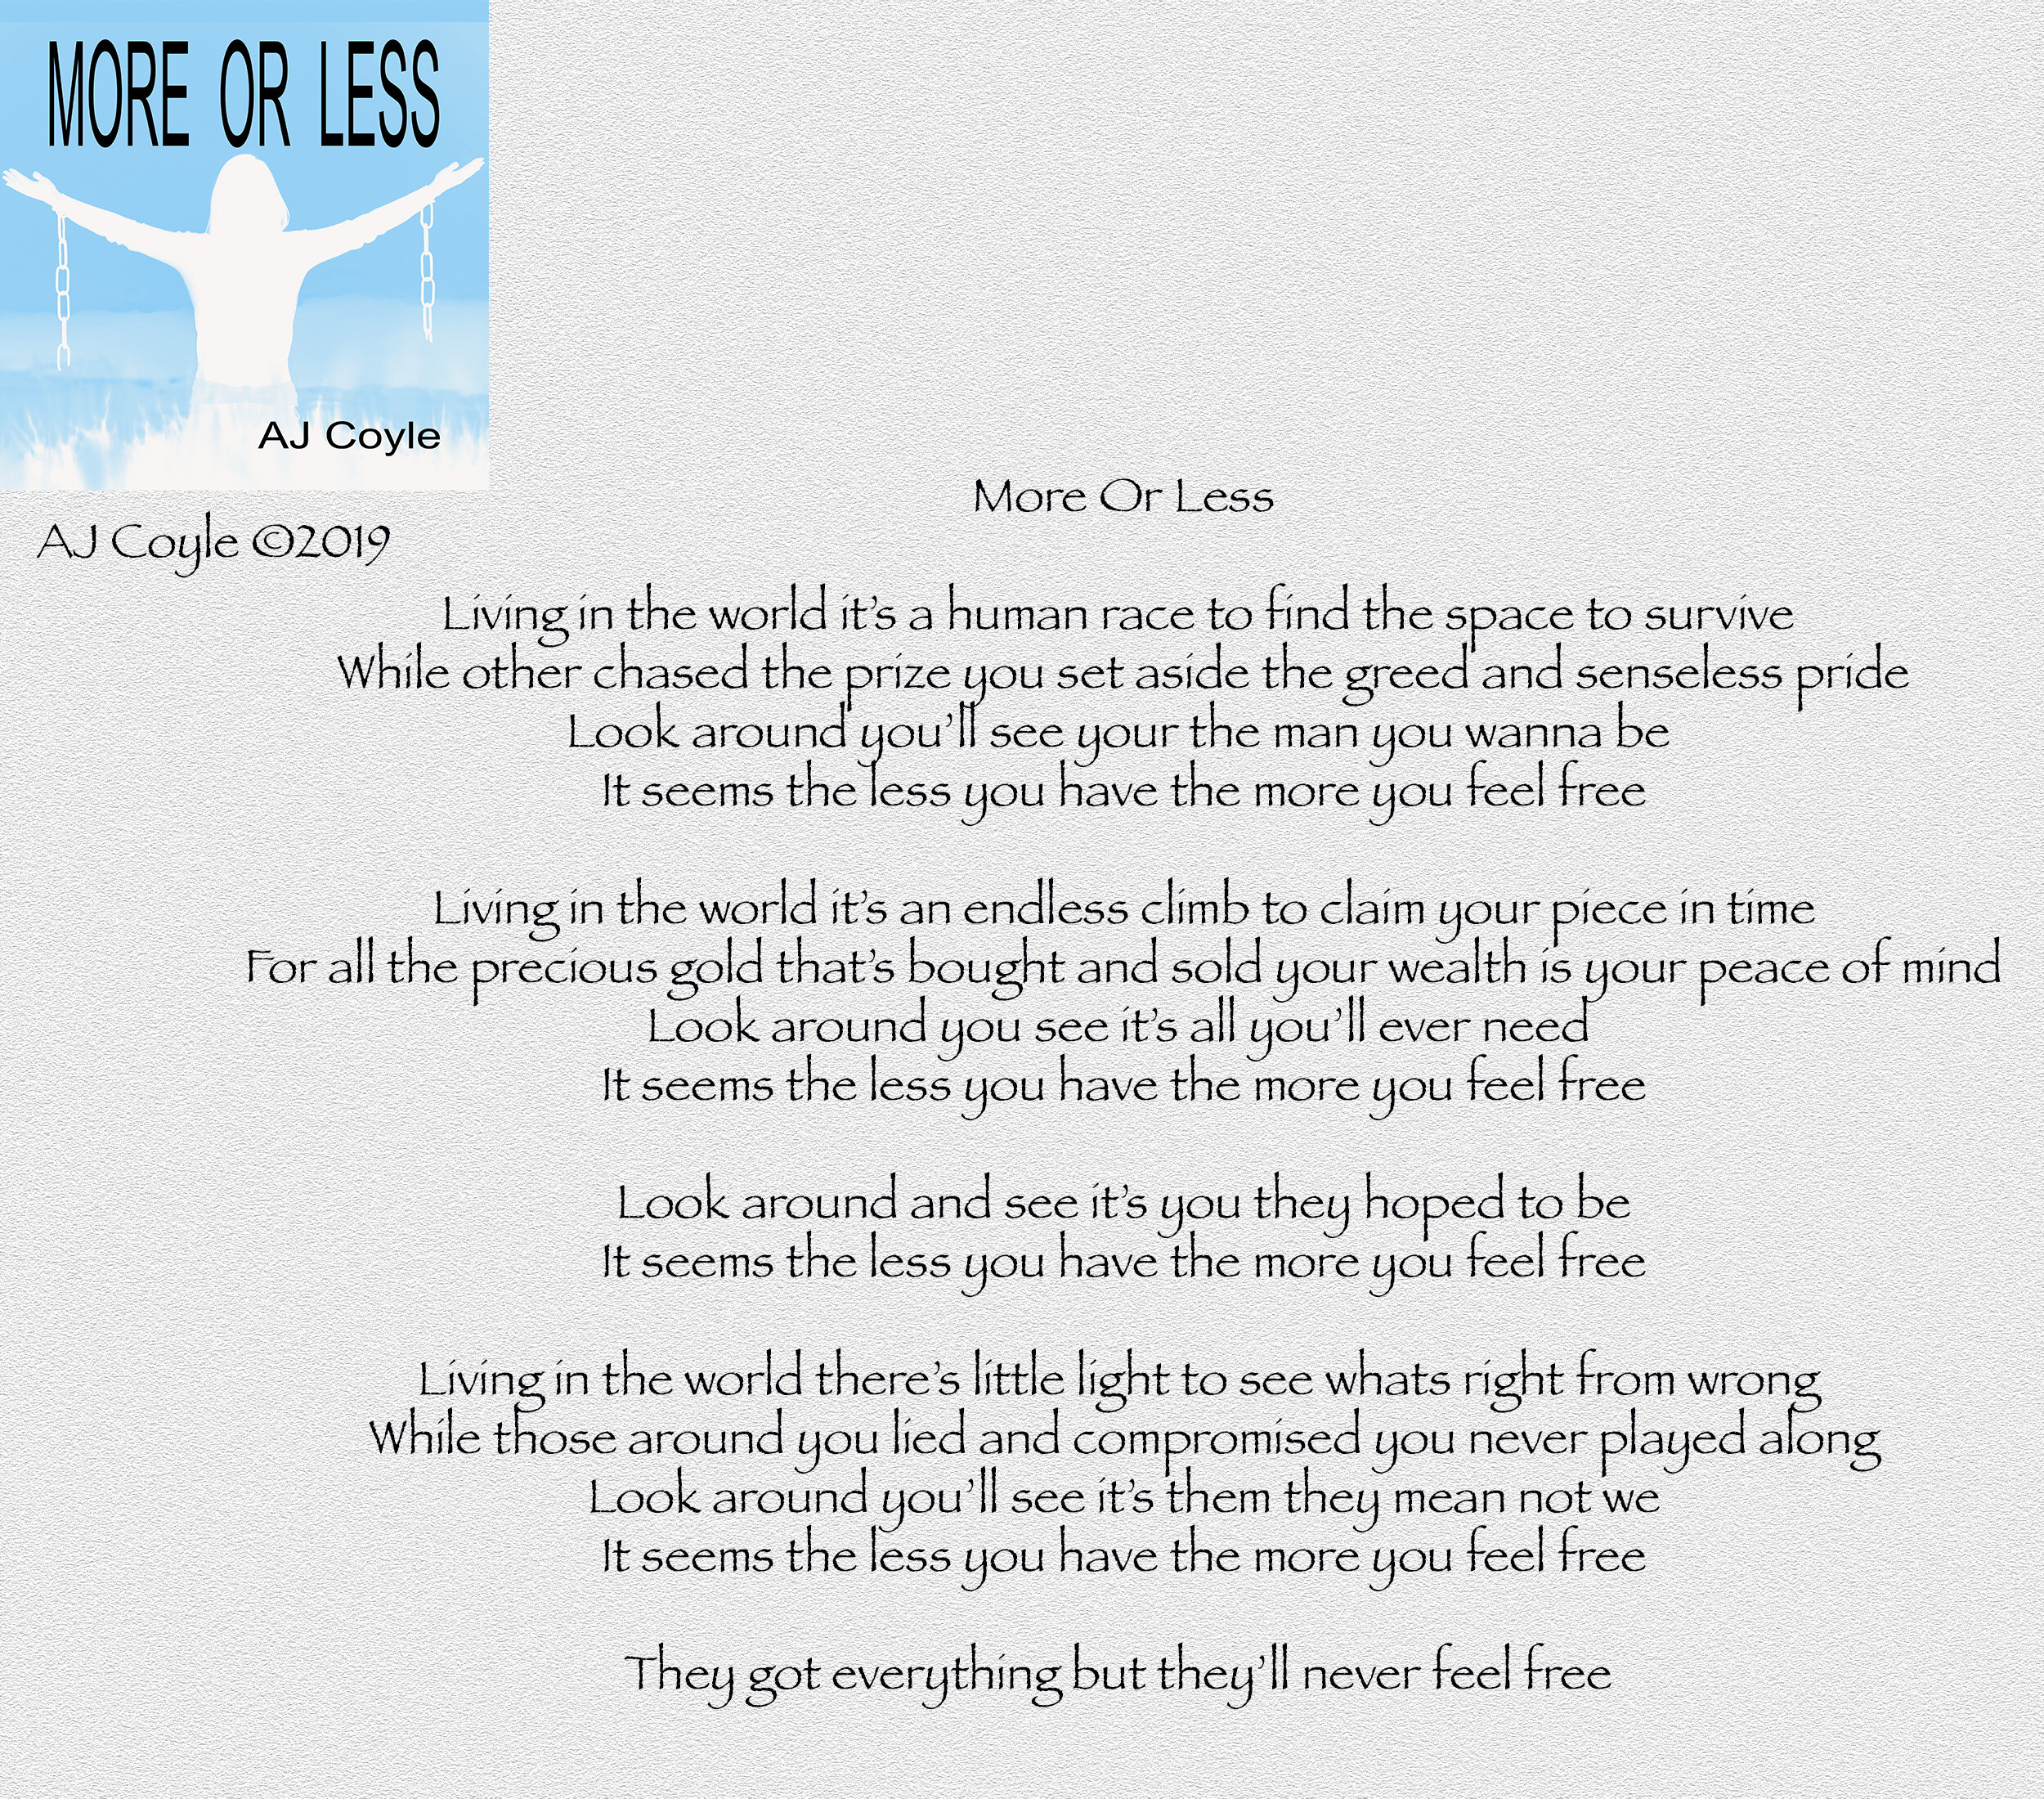 More Or Less - AJ Coyle